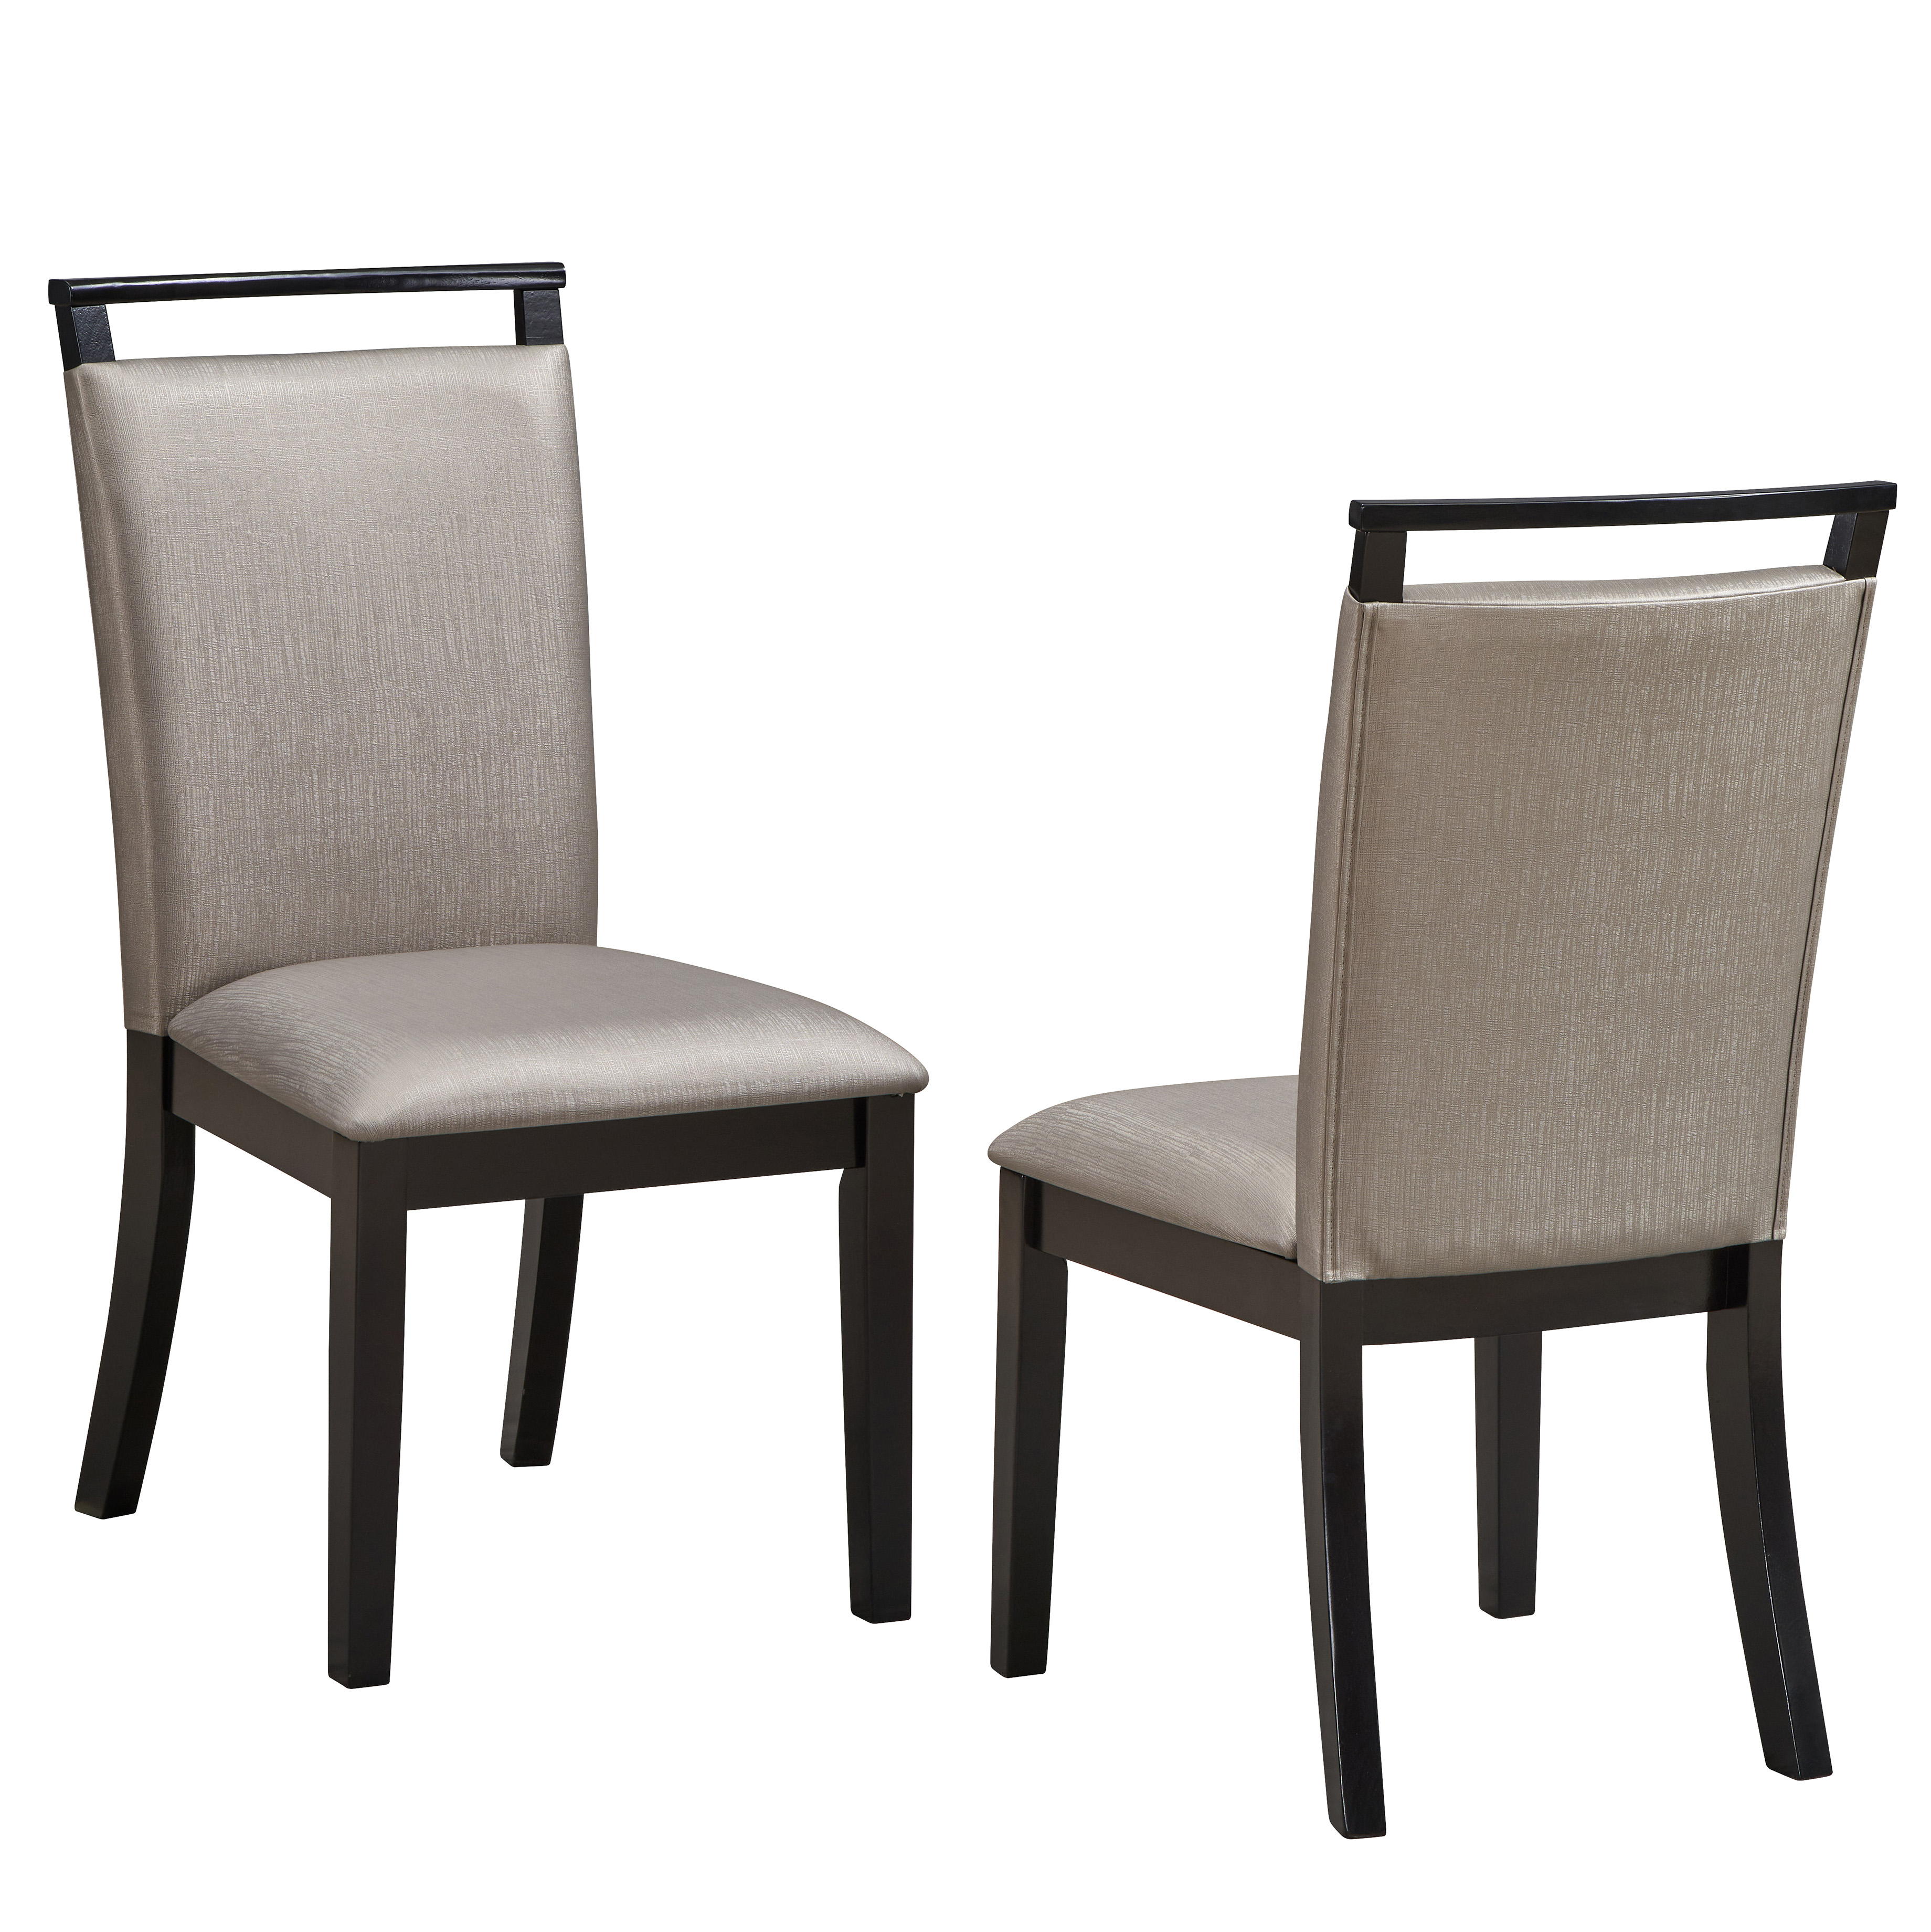 Austin Dining Chairs - Set of 2 (Cappuccino)